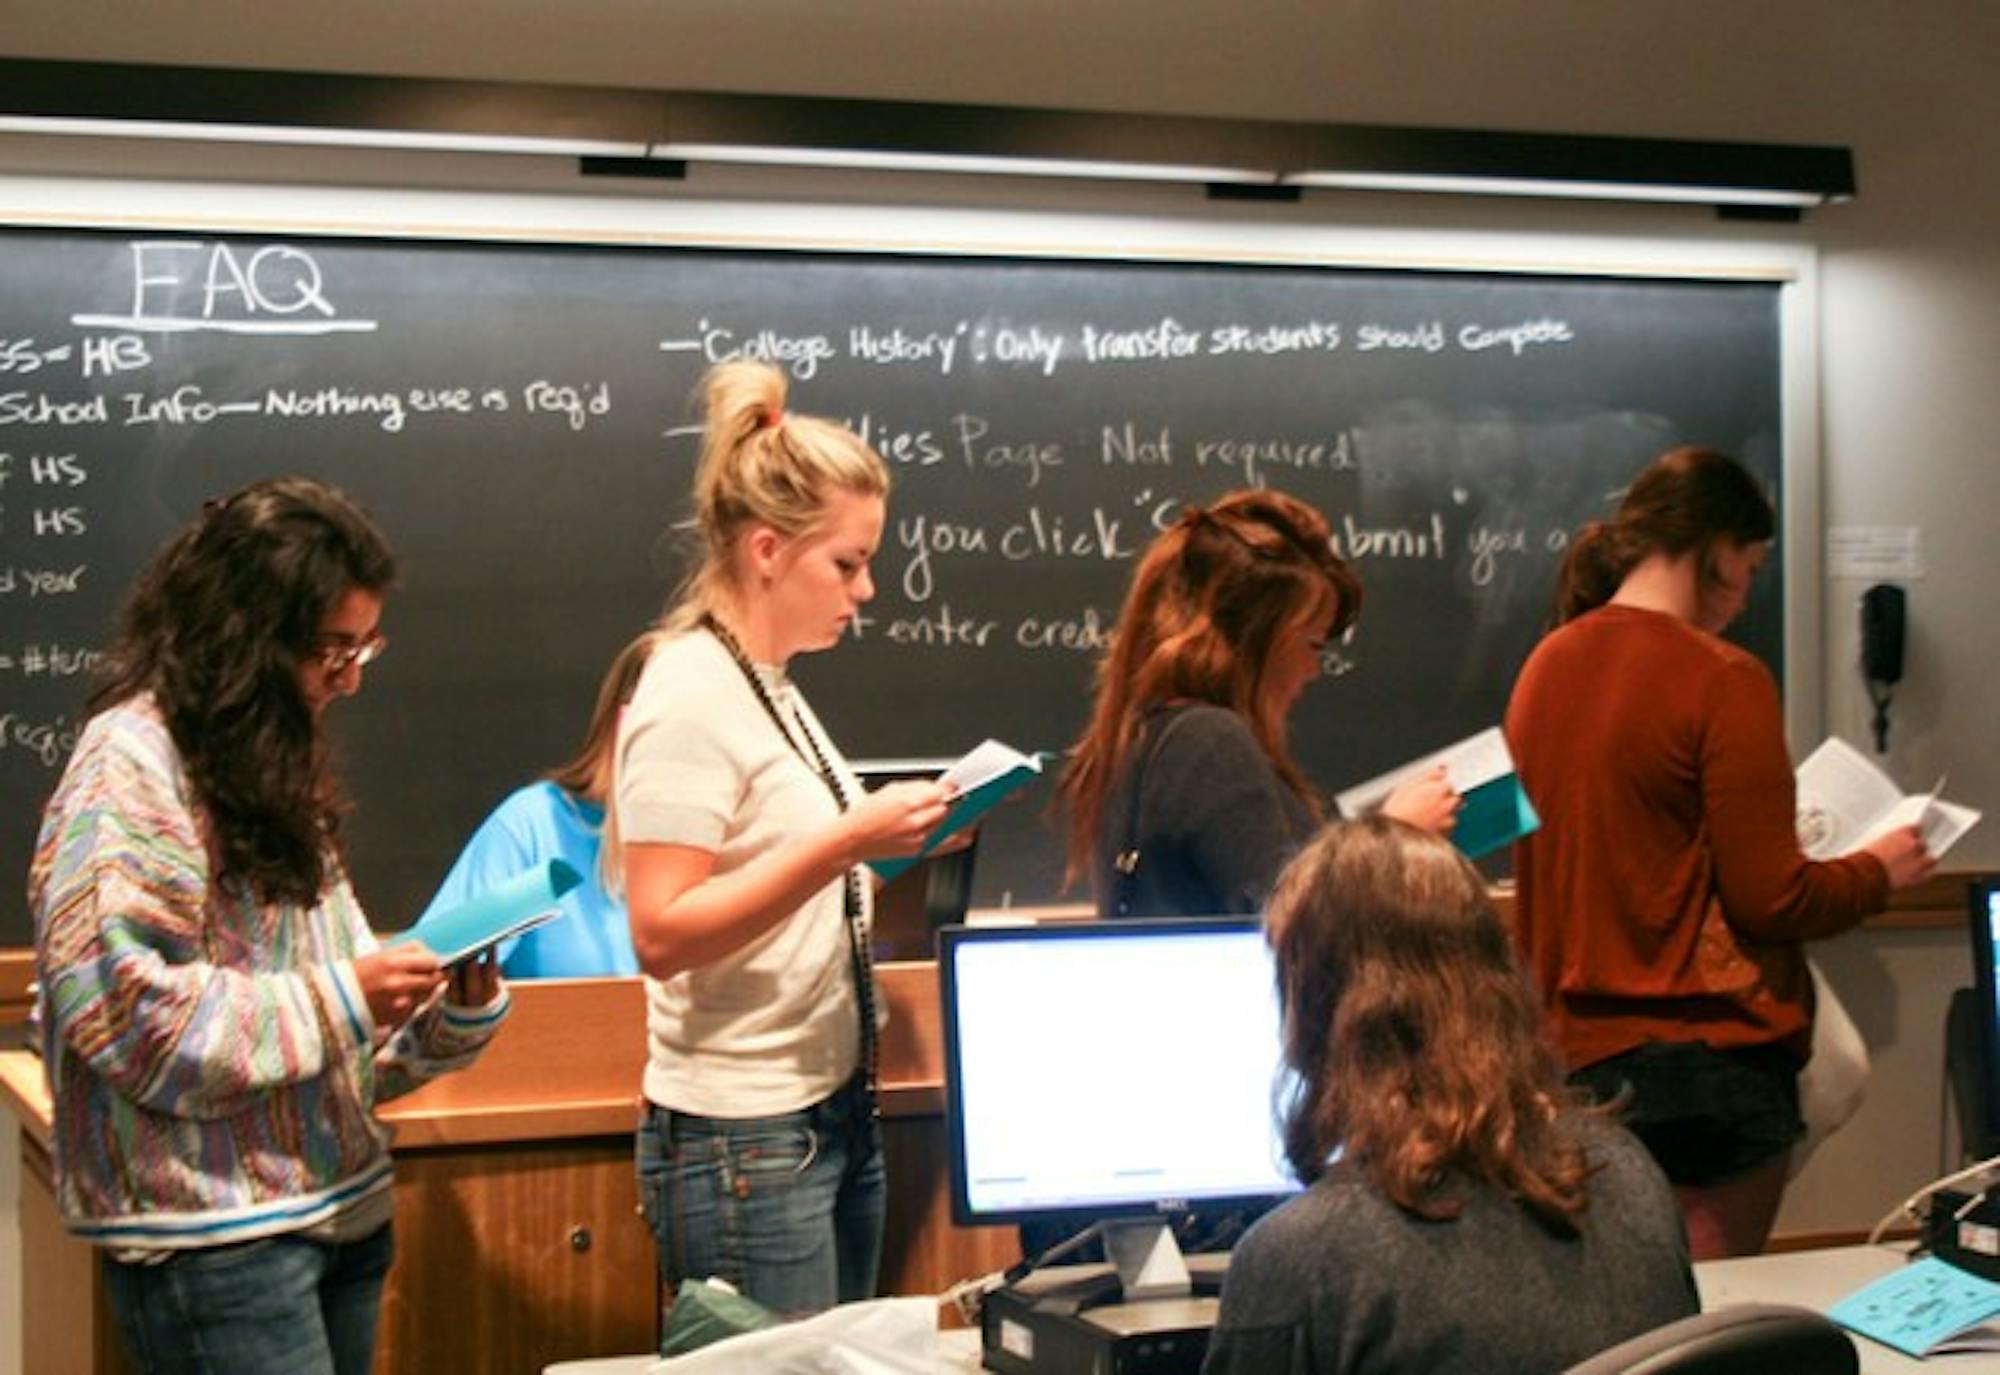 Women register to participate in fall sorority rush, which will be conducted with the use of a new computer system, Select and Rank. The system is aimed at better matching women and sororities.